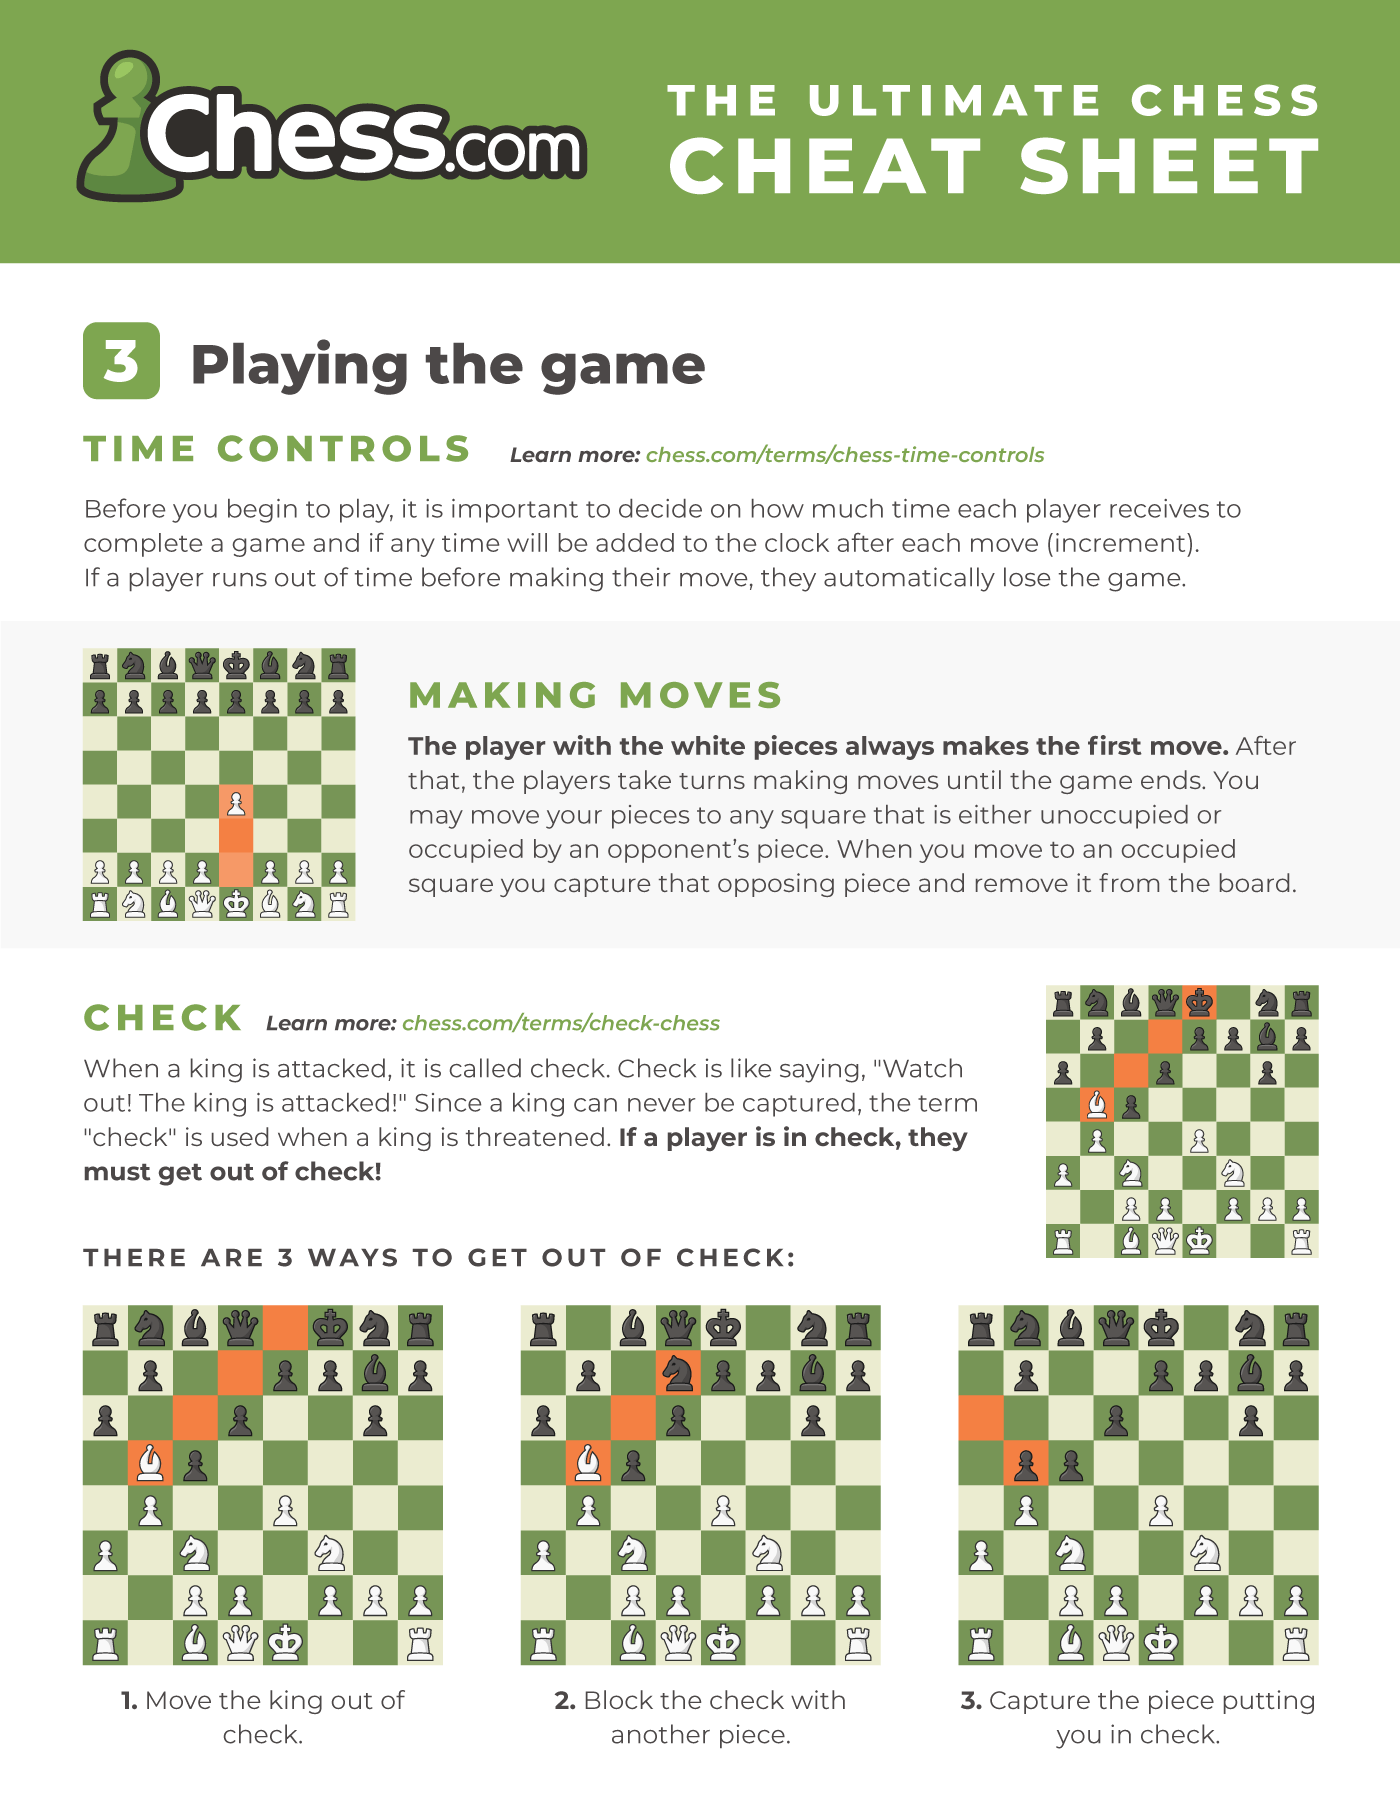 Chess Rules